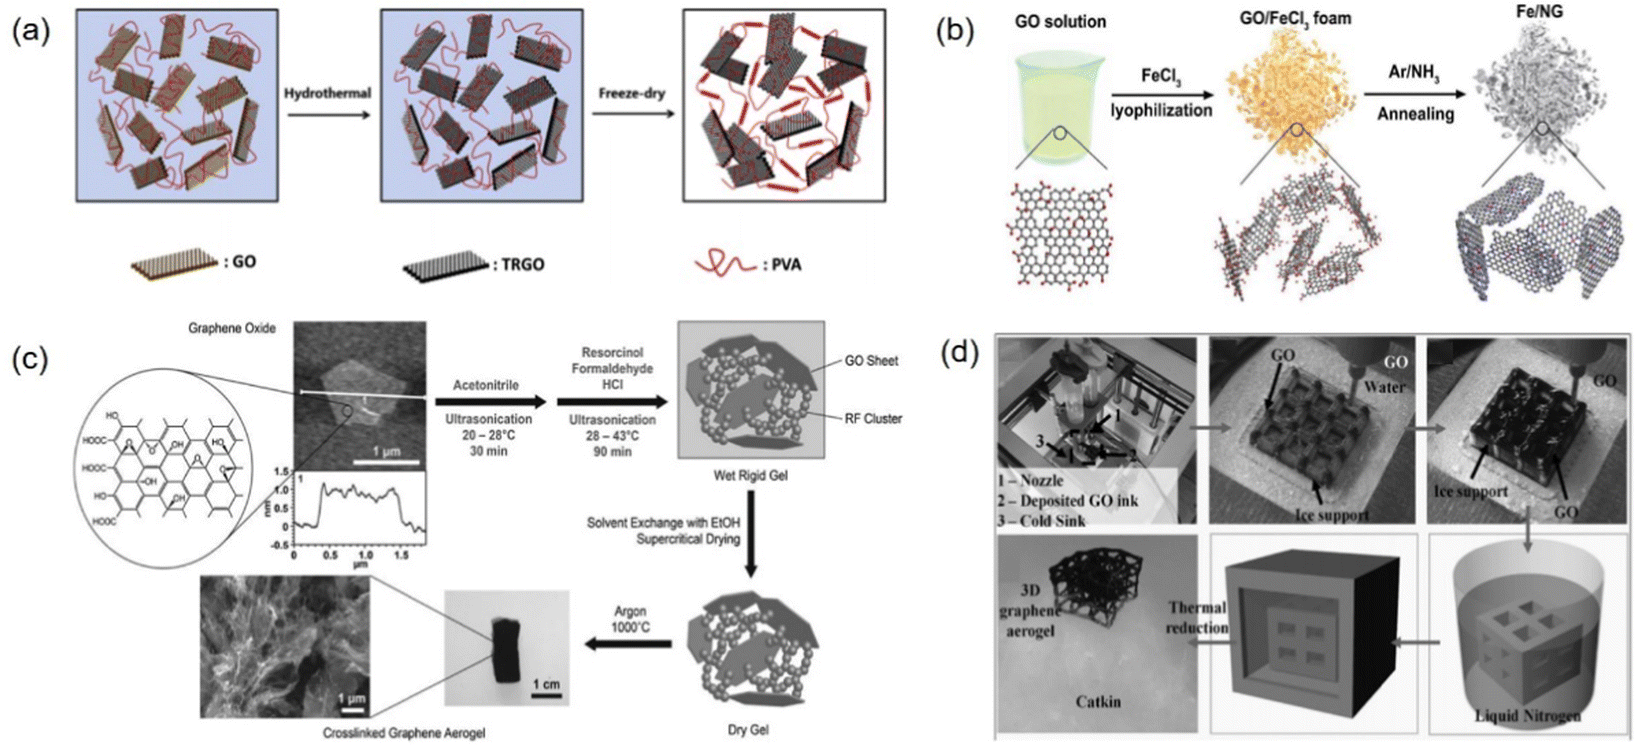 Construction and application of carbon aerogels in microwave 